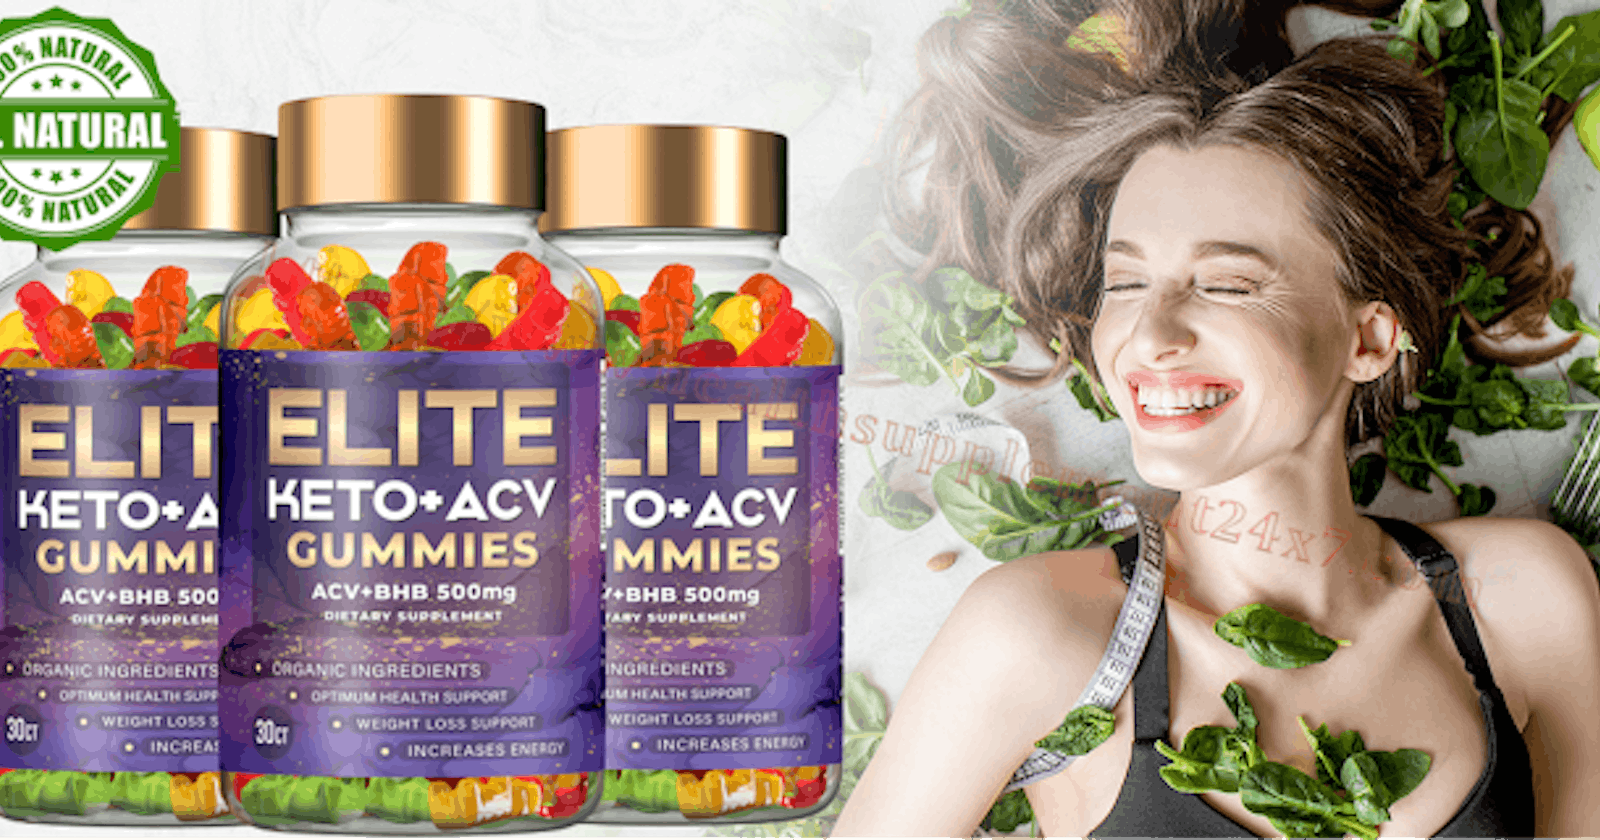 Elite Keto ACV Gummies | Elite Keto + ACV Gummies Ingredients, Side-Effects, Instant Result For Loose Weight!